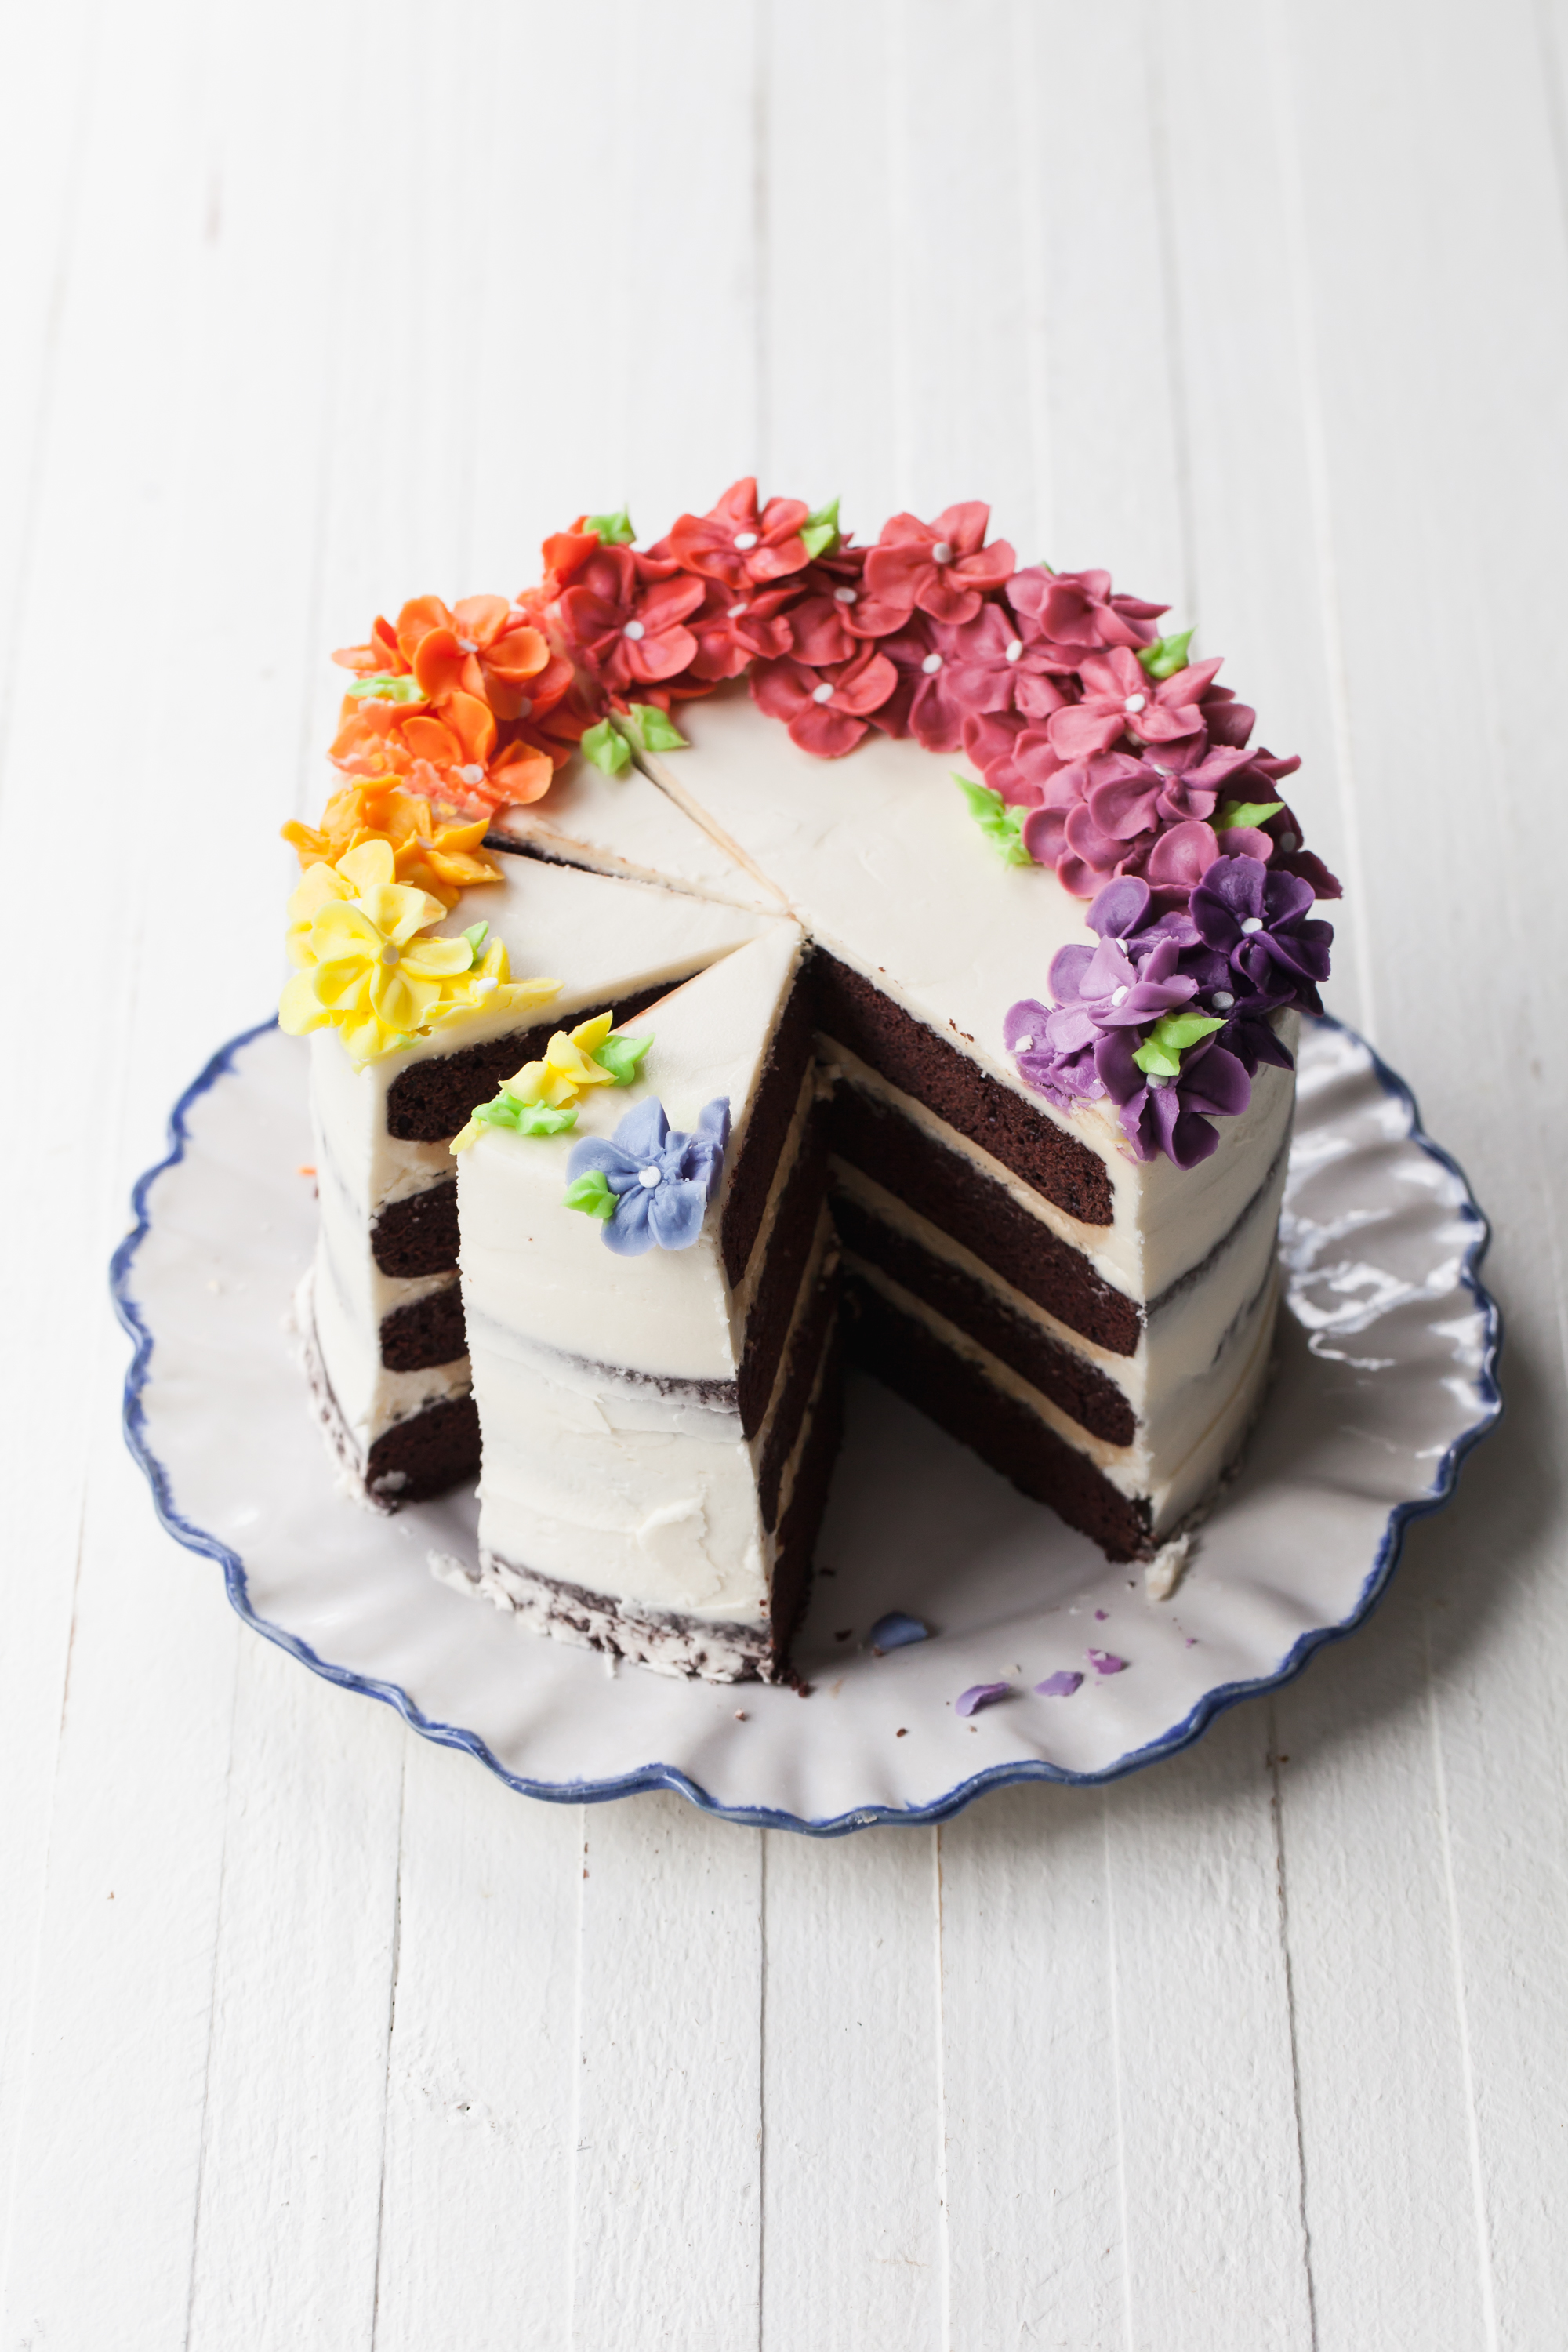 How to make a rainbow cake with layers of eggless chocolate cake and peanut butter filling